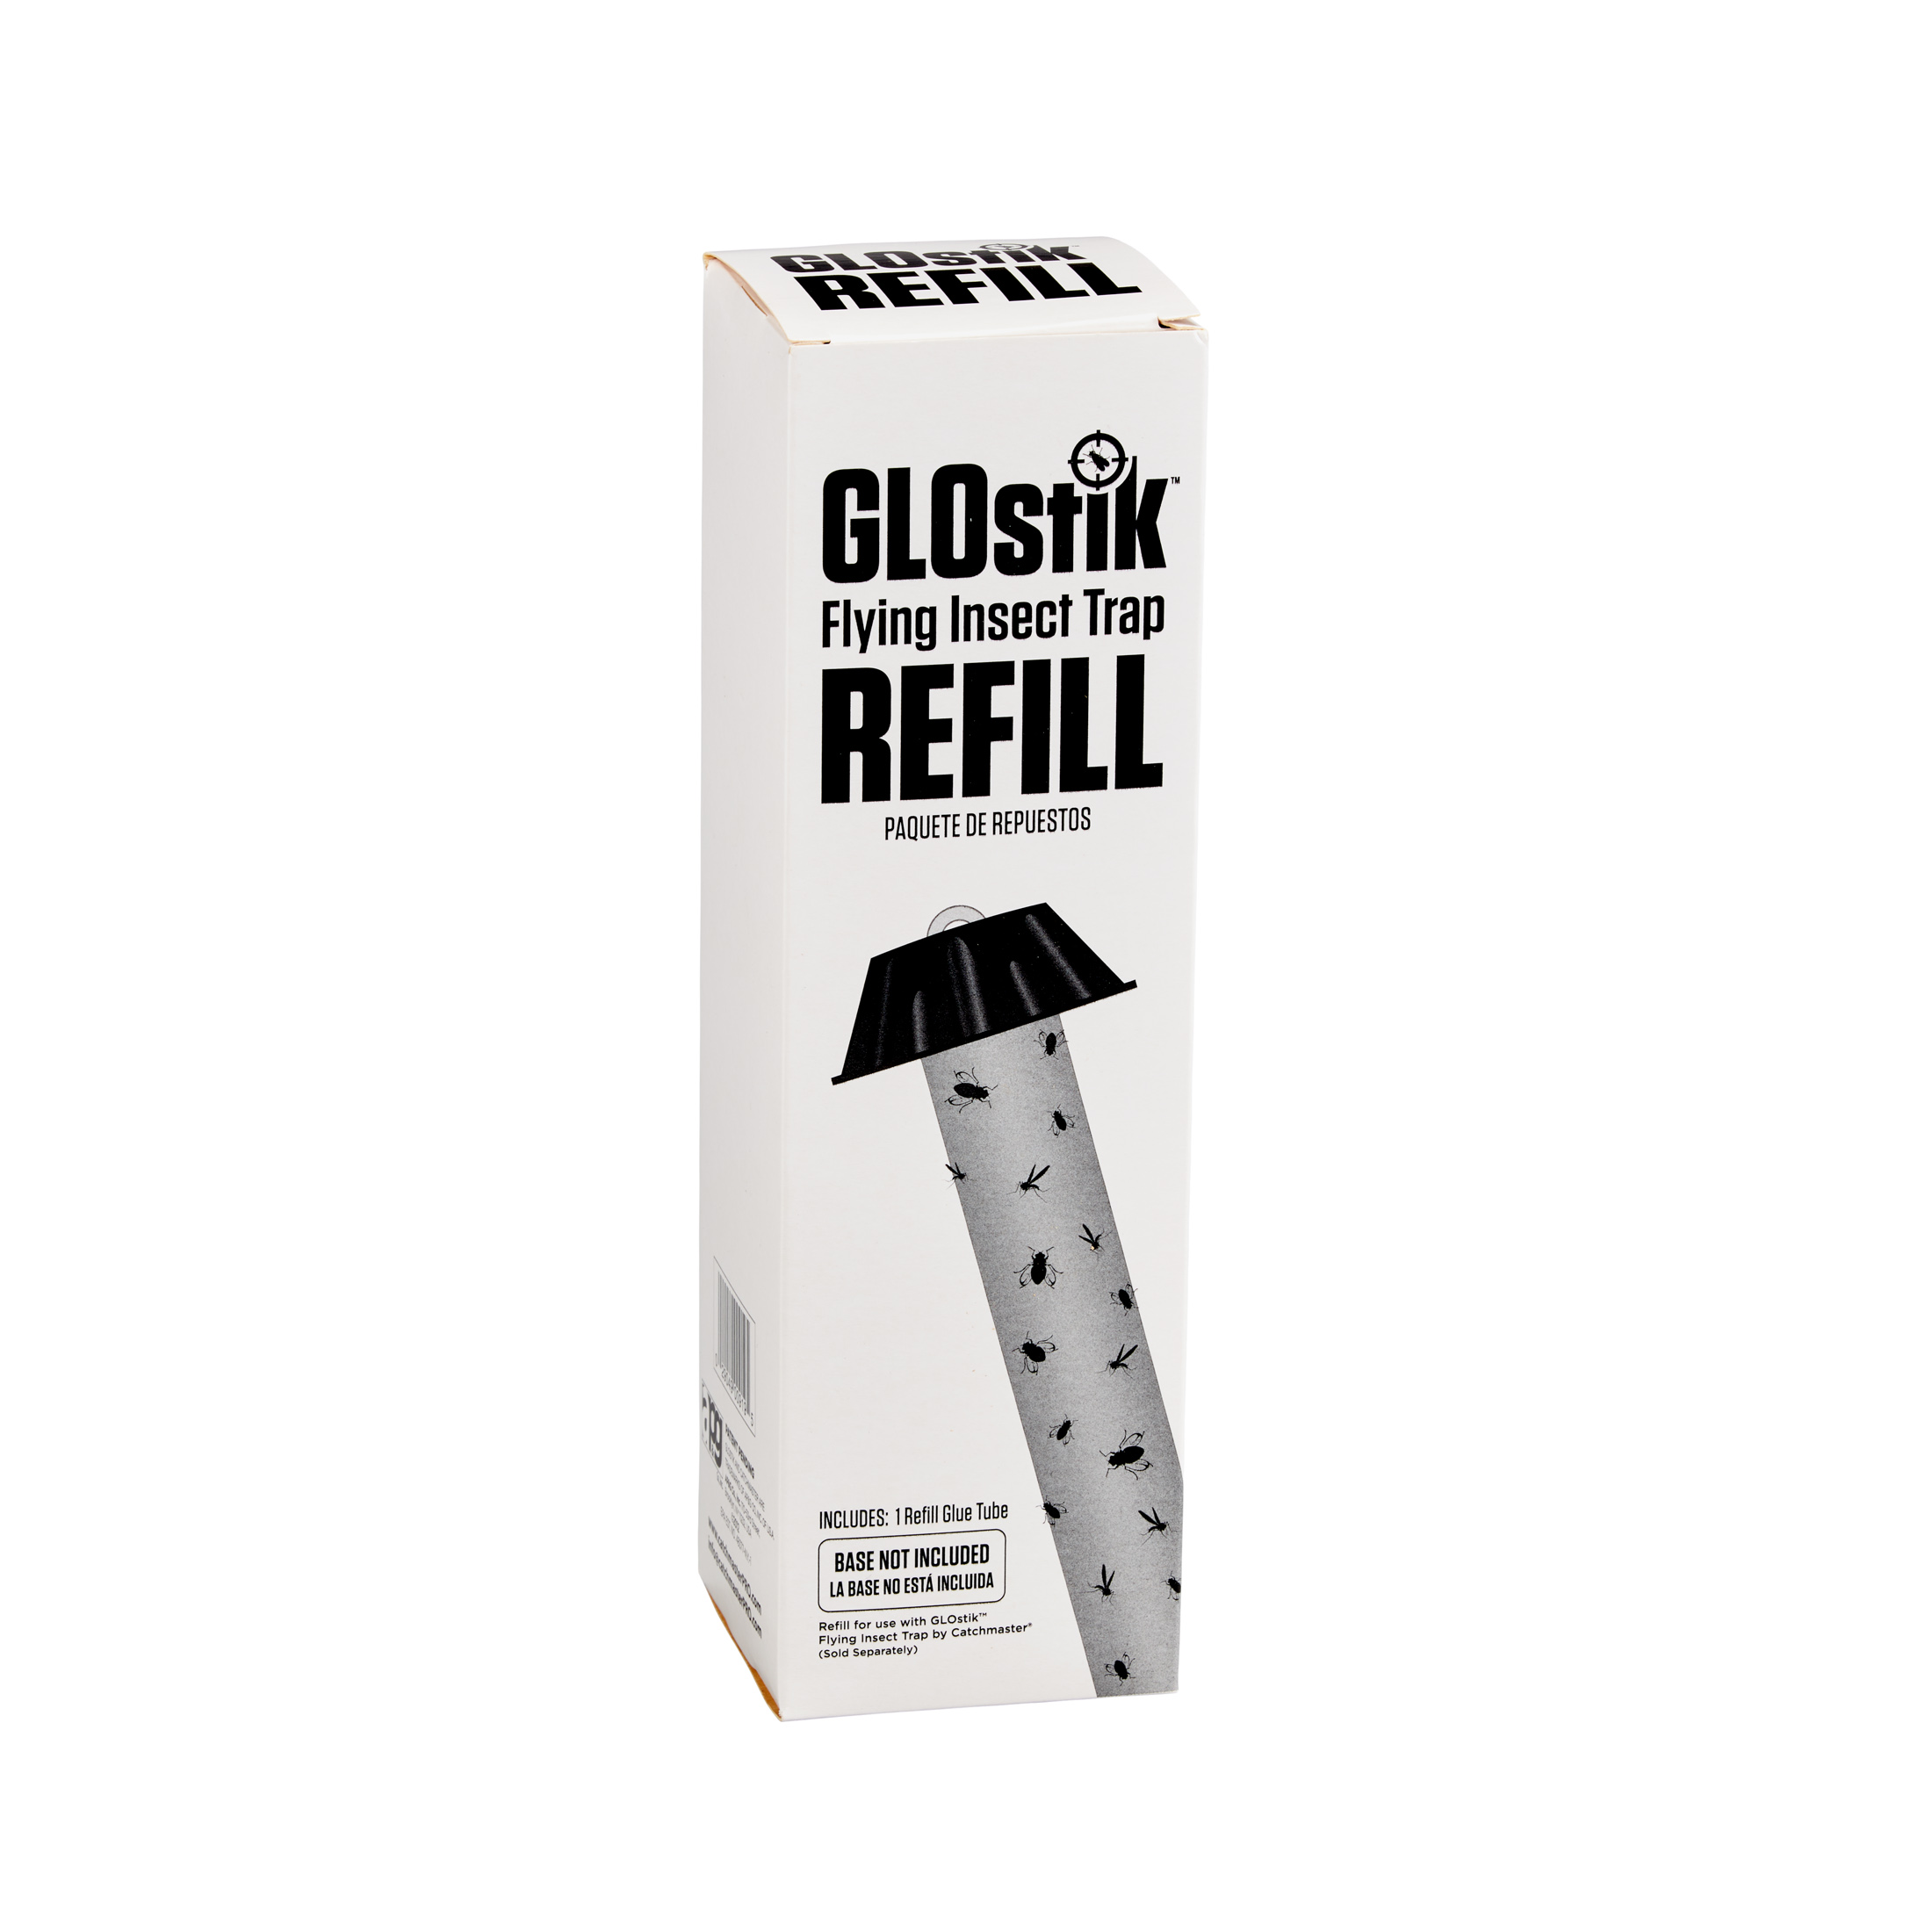 GLOstik Flying Insect Trap REFILL